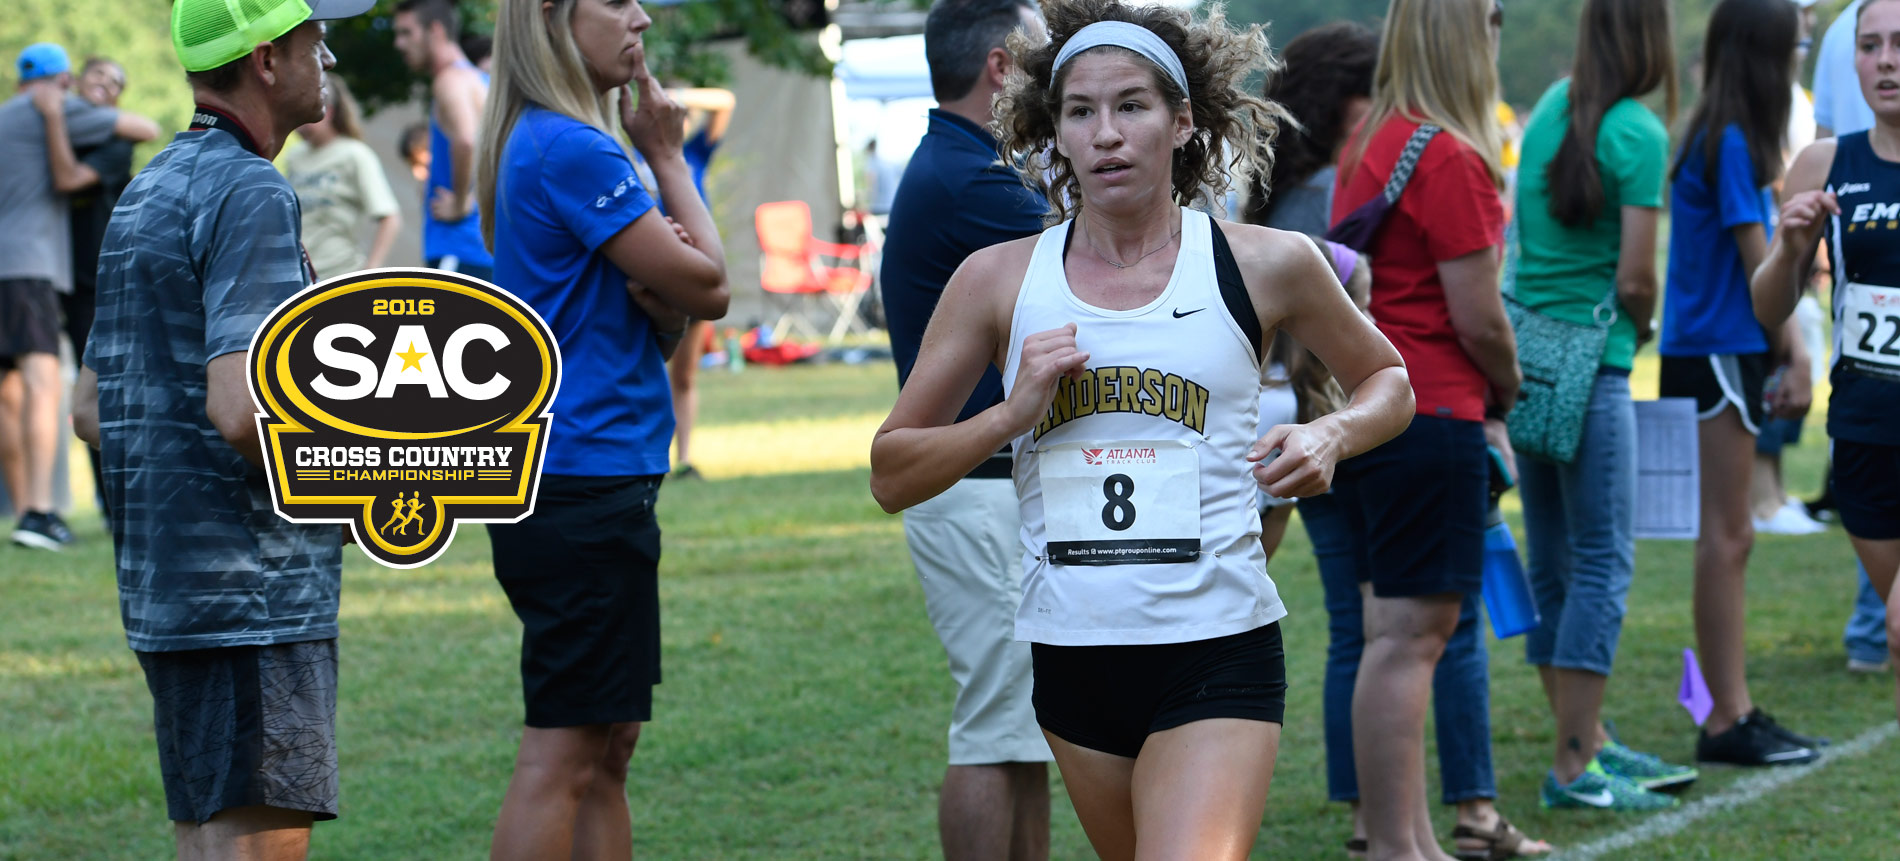 Women’s Cross Country Captures Third Place at SAC Championship